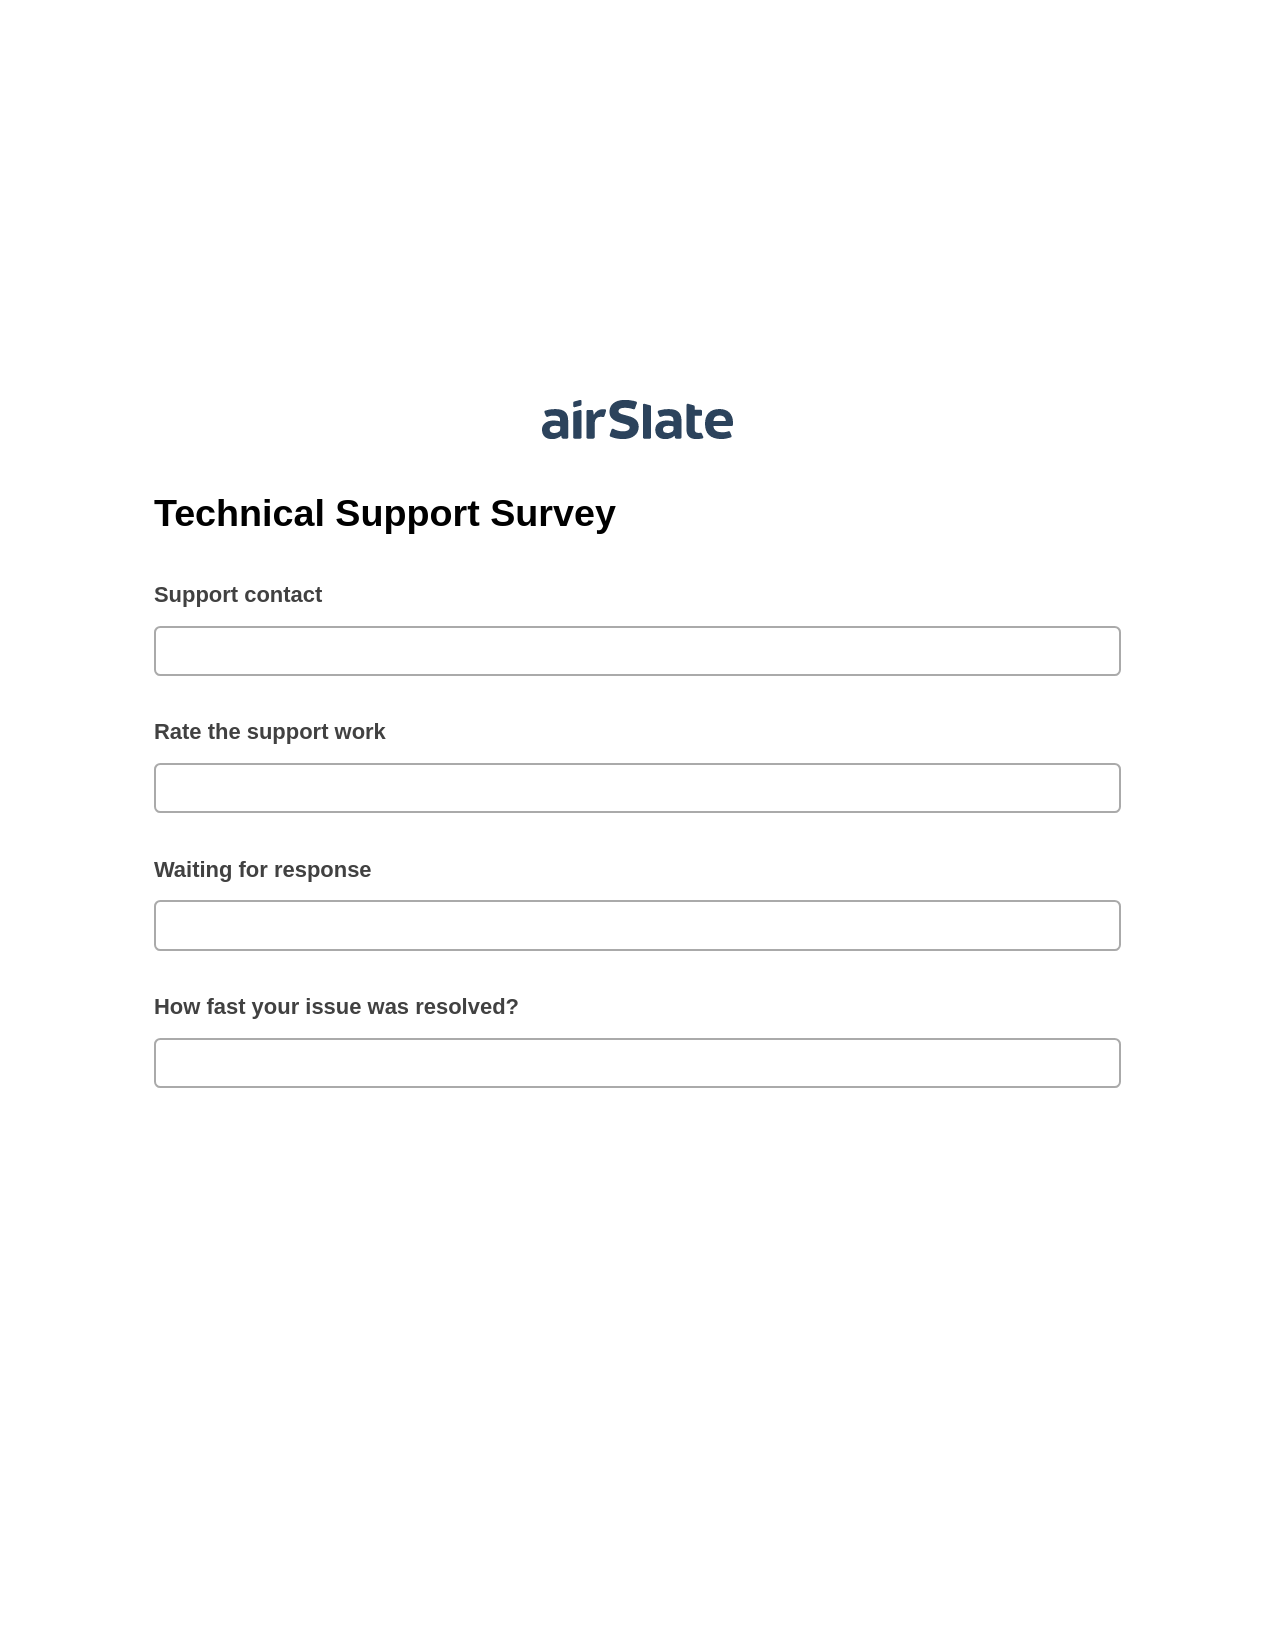 Multirole Technical Support Survey Pre-fill from CSV File Bot, Create slate from another Flow Bot, Post-finish Document Bot